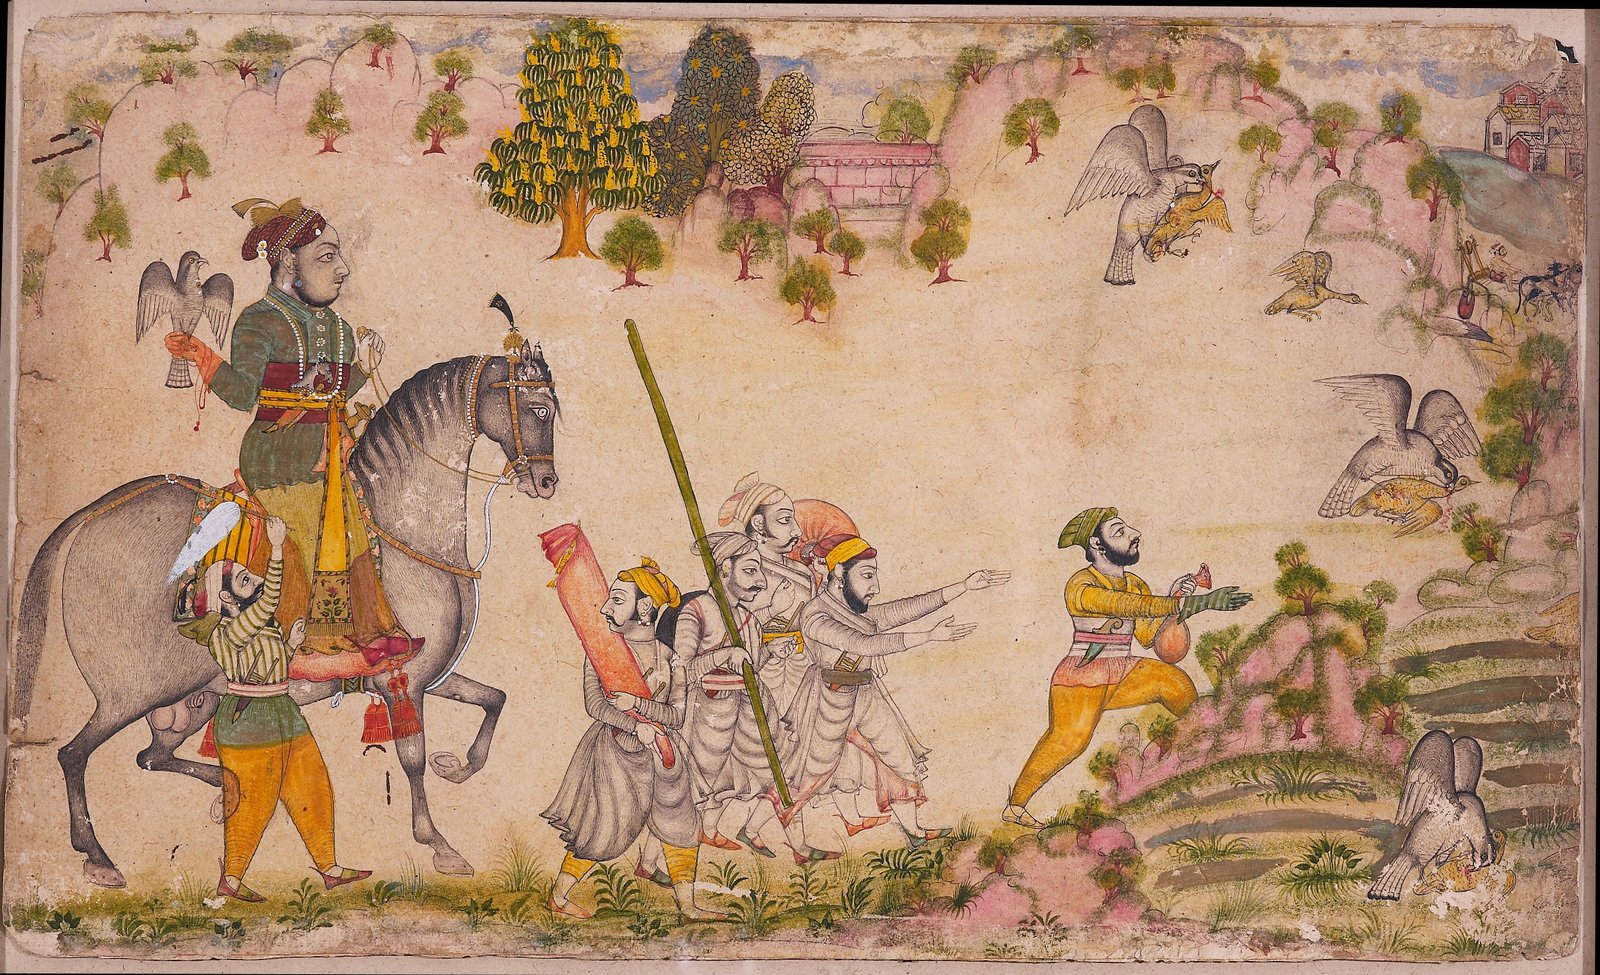 Attributed to The Stipple Master (Indian, active ca. 1690– 1715)
Sangram Singh Hawking
Rajasthan, Udaipur, ca. 1705–10
Opaque watercolor, gold and ink on paper Image:
31 × 43.5 cm
Howard Hodgkin Collection, Purchase, Gift of Florence and Herbert Irving, by exchange, 2022
2022.224